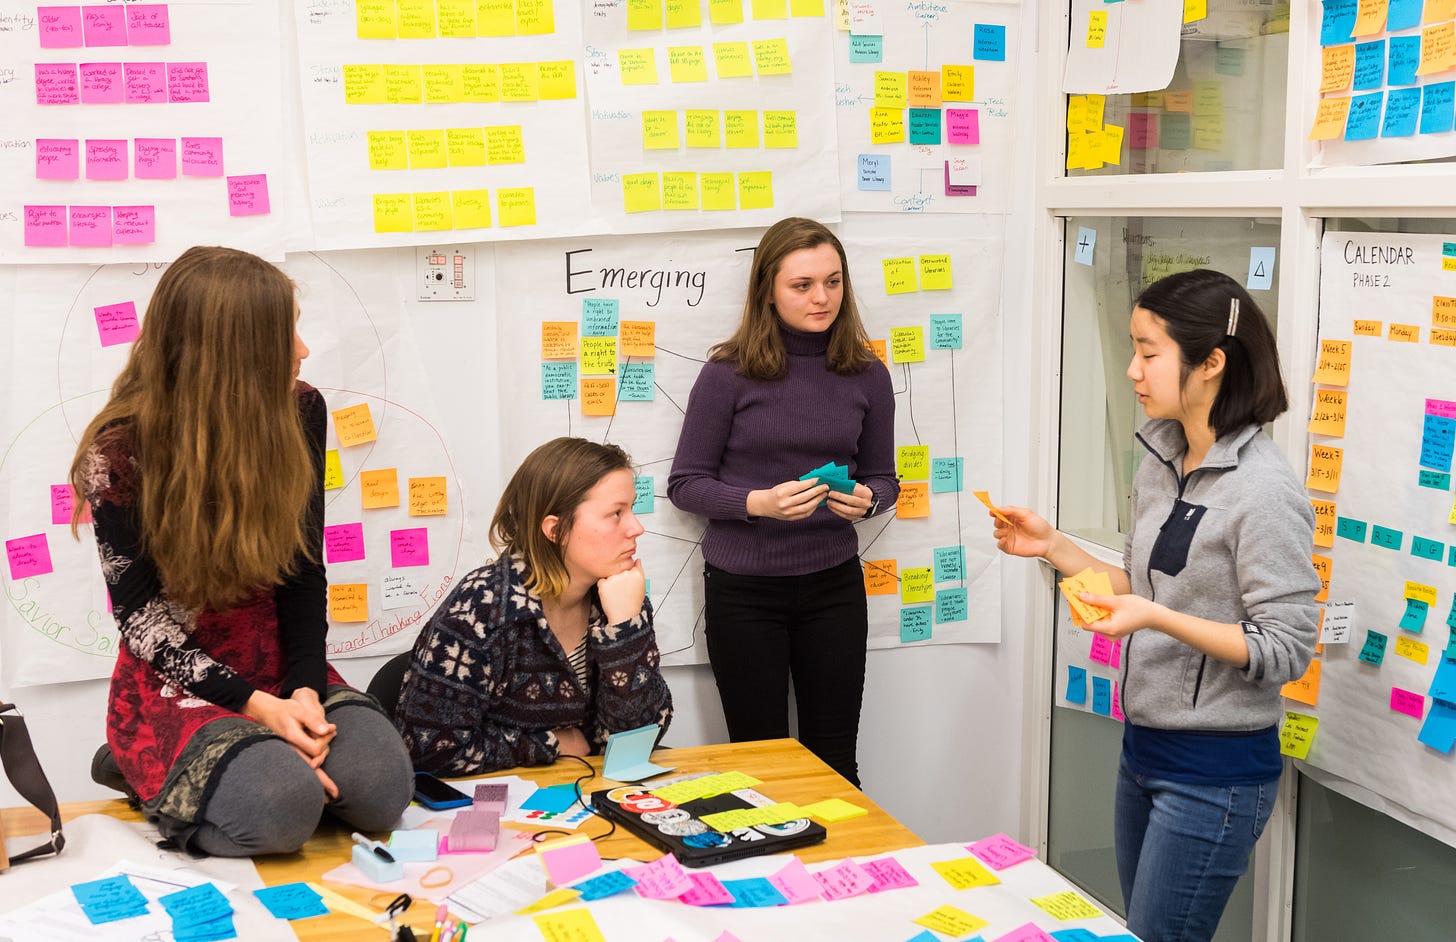 Four Olin students stand in a design studio discussing a project, surrounded by posters and graphs and dozens of sticky notes, processing ideas.